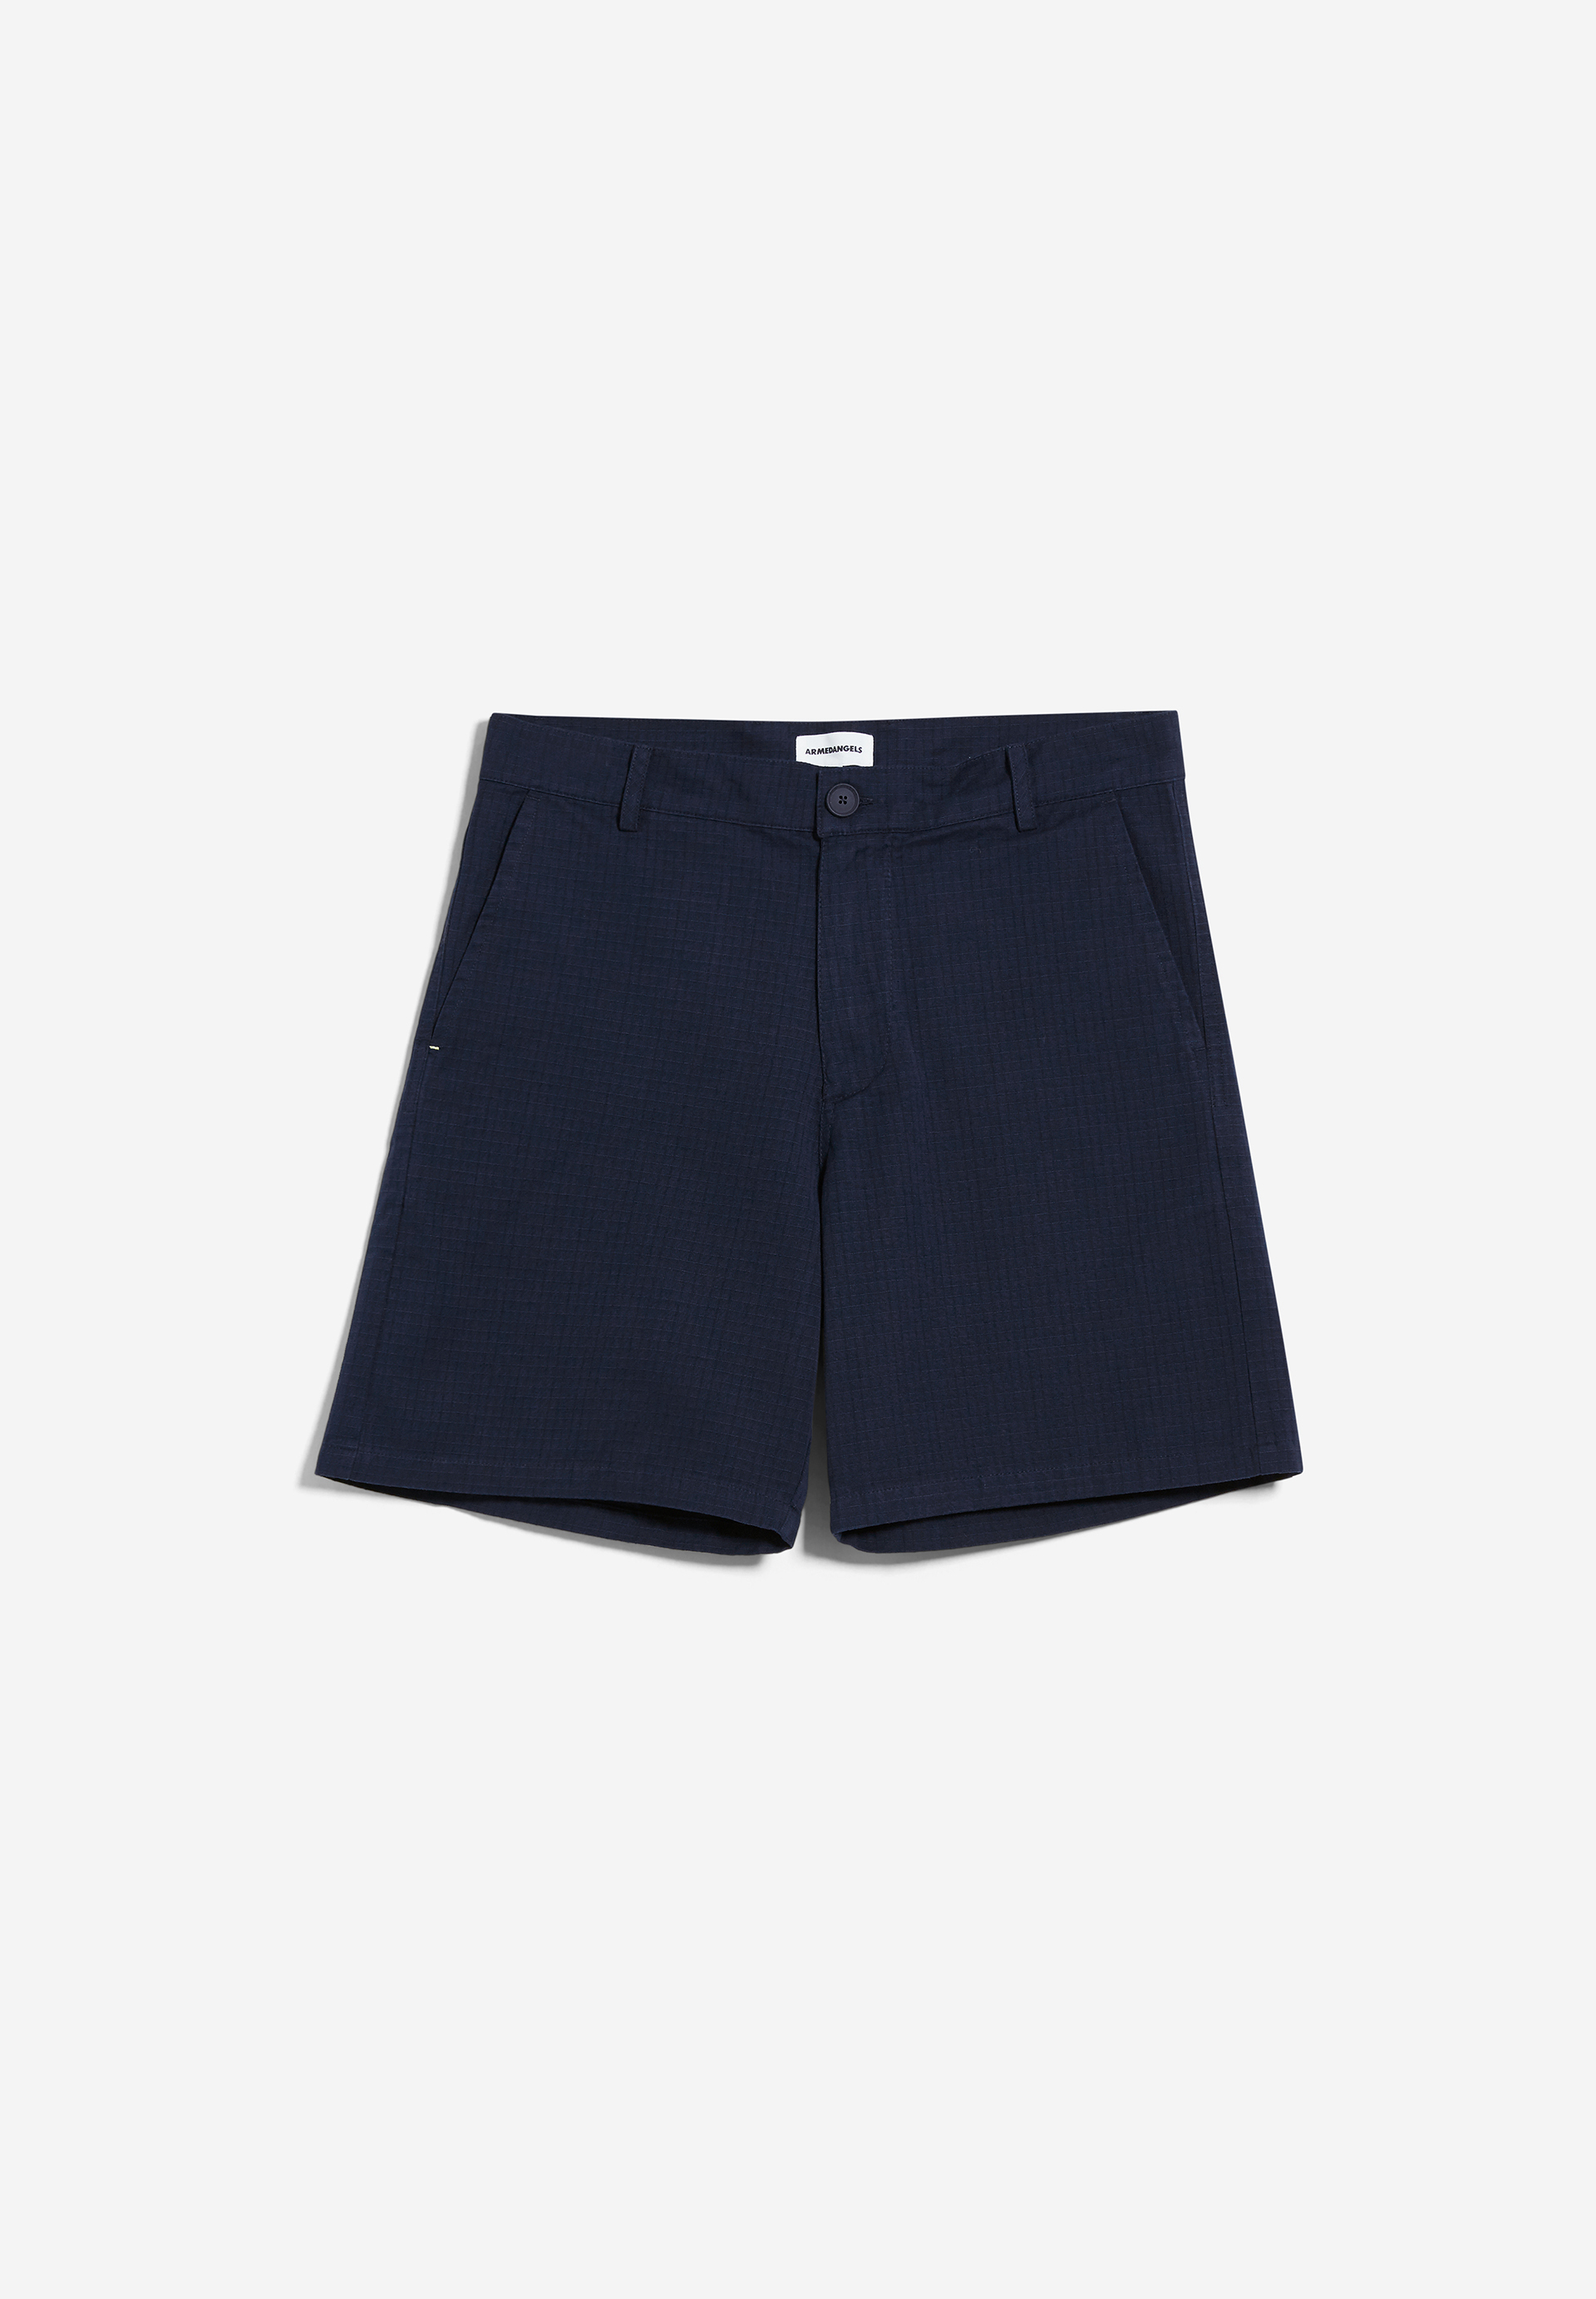 SOJAAN RIBSTOP Shorts Relaxed Fit aus Bio-Baumwolle